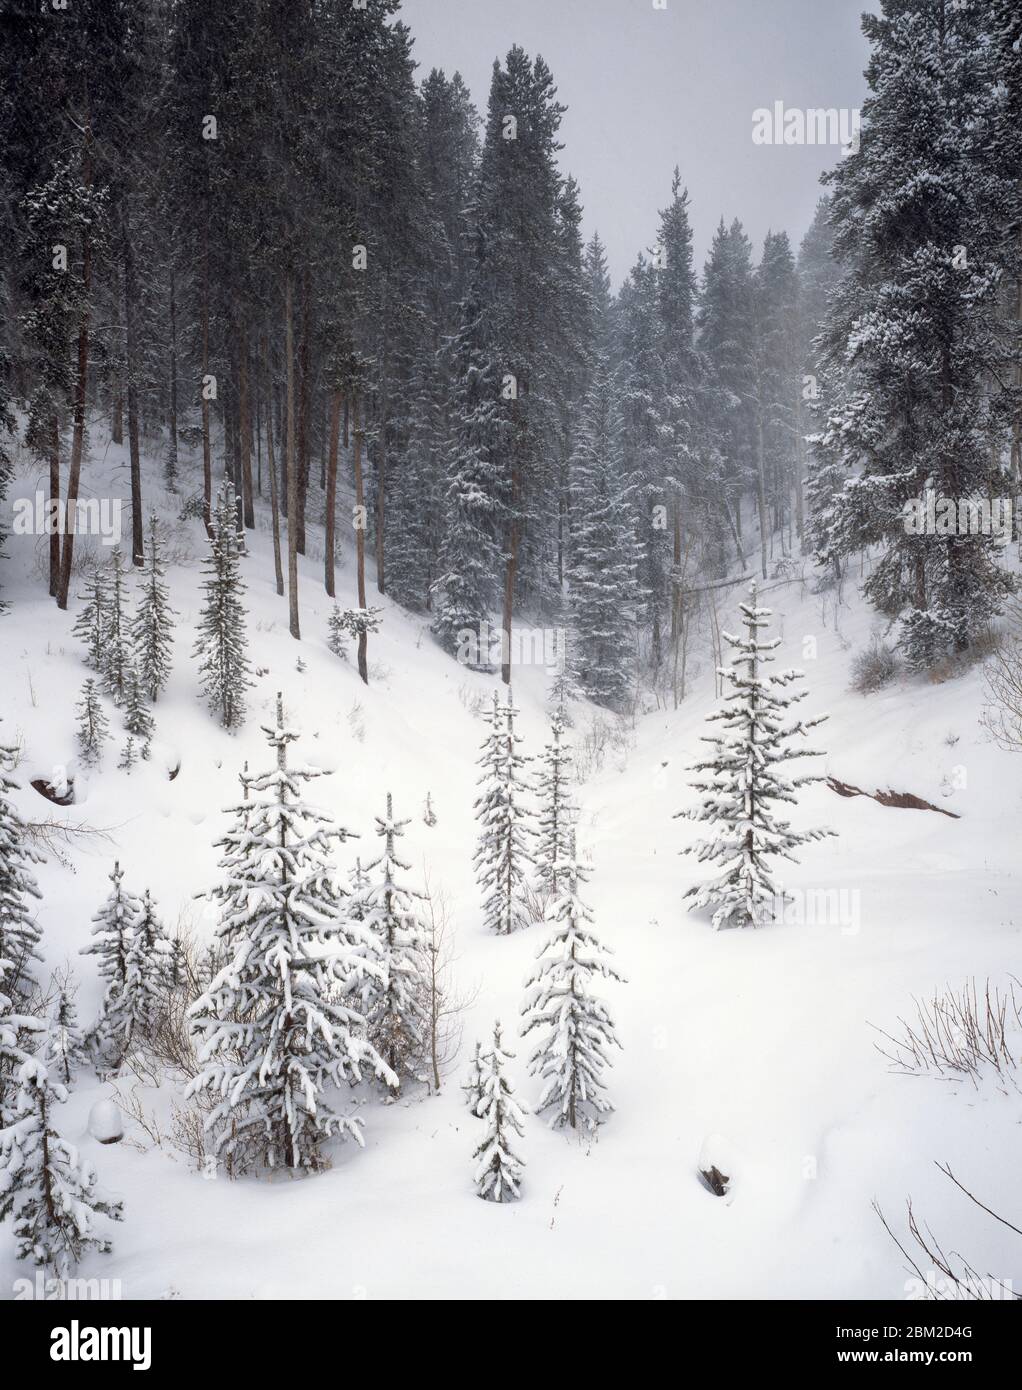 Landscape with evergreen forest in winter, Vail, Colorado, USA Stock Photo